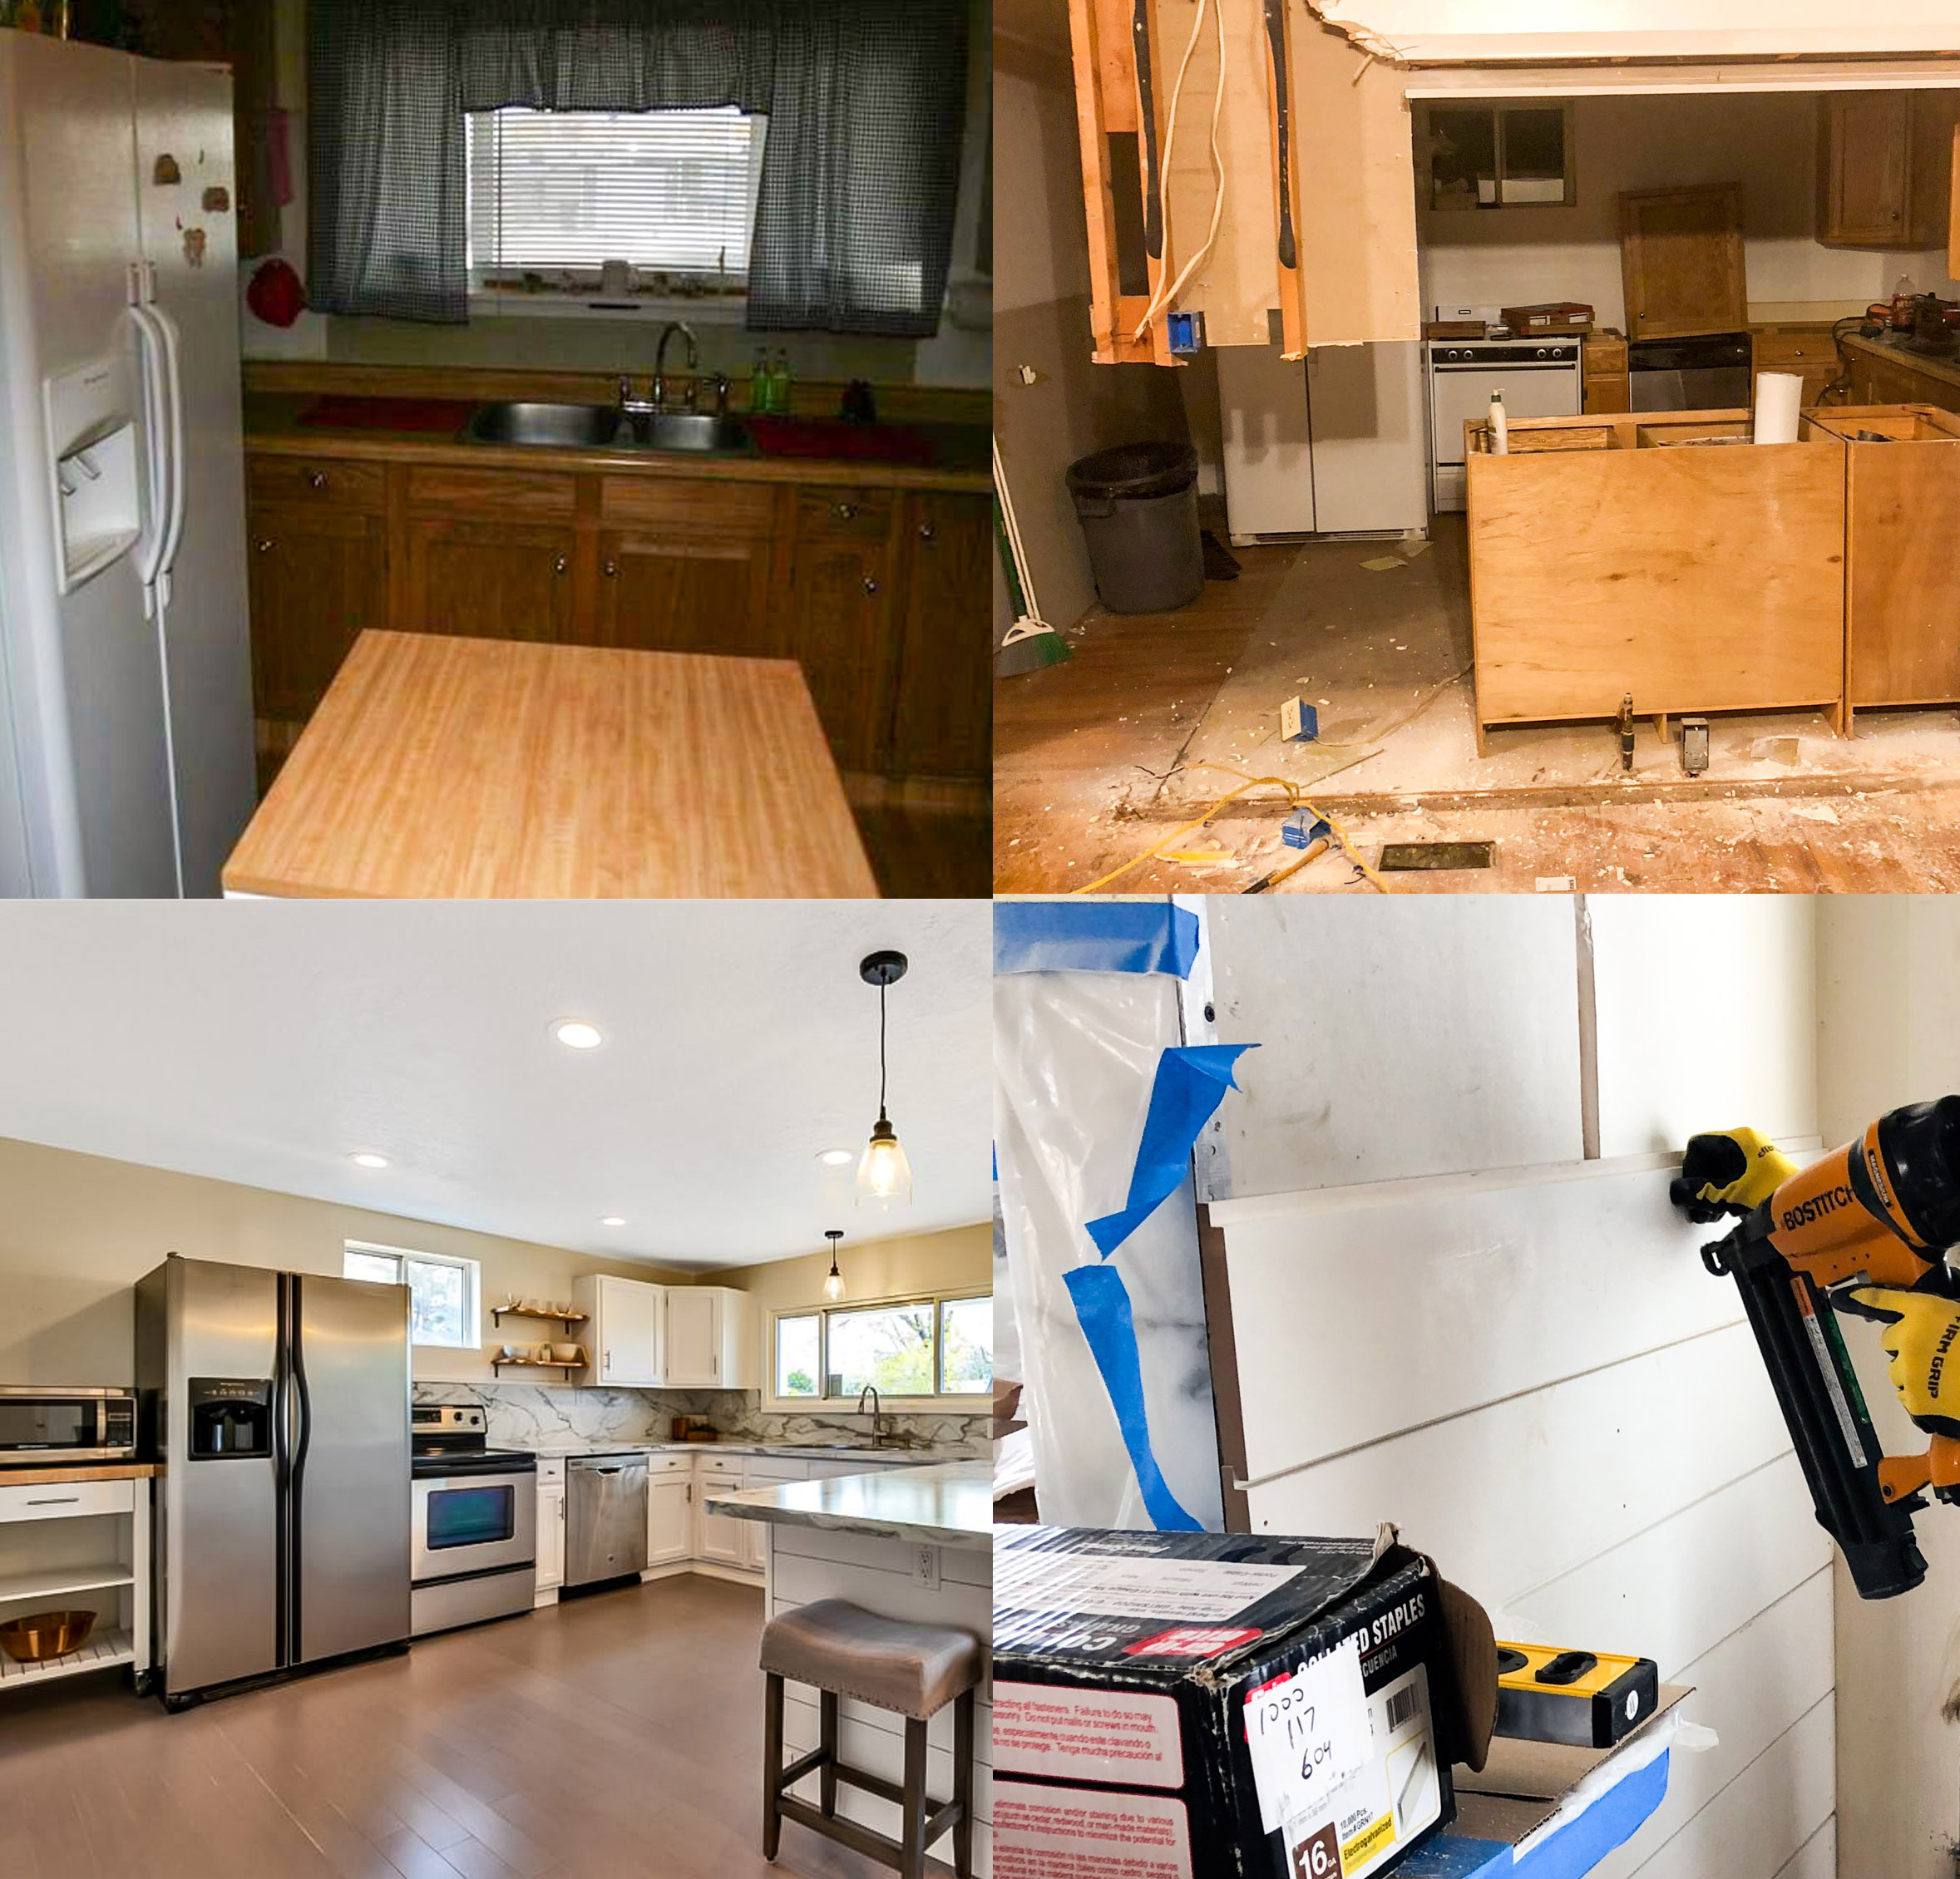 Inexpensive Kitchen Renovation Before and After Home 2